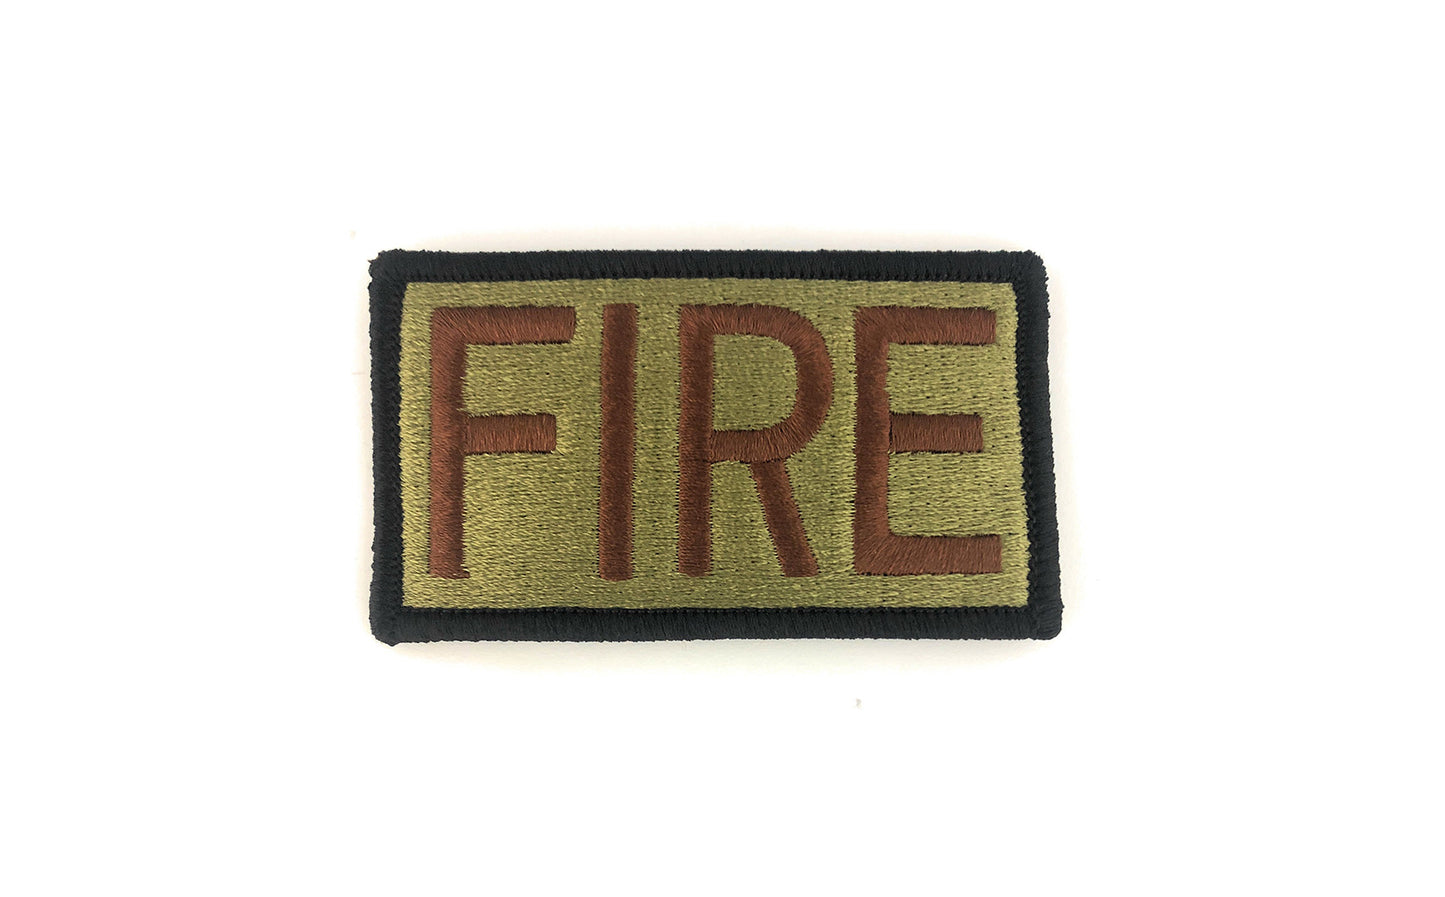 A.F. Fire Brassard with Spice Brown Letters and Black Border Ocp Patch w/Hook Fastener